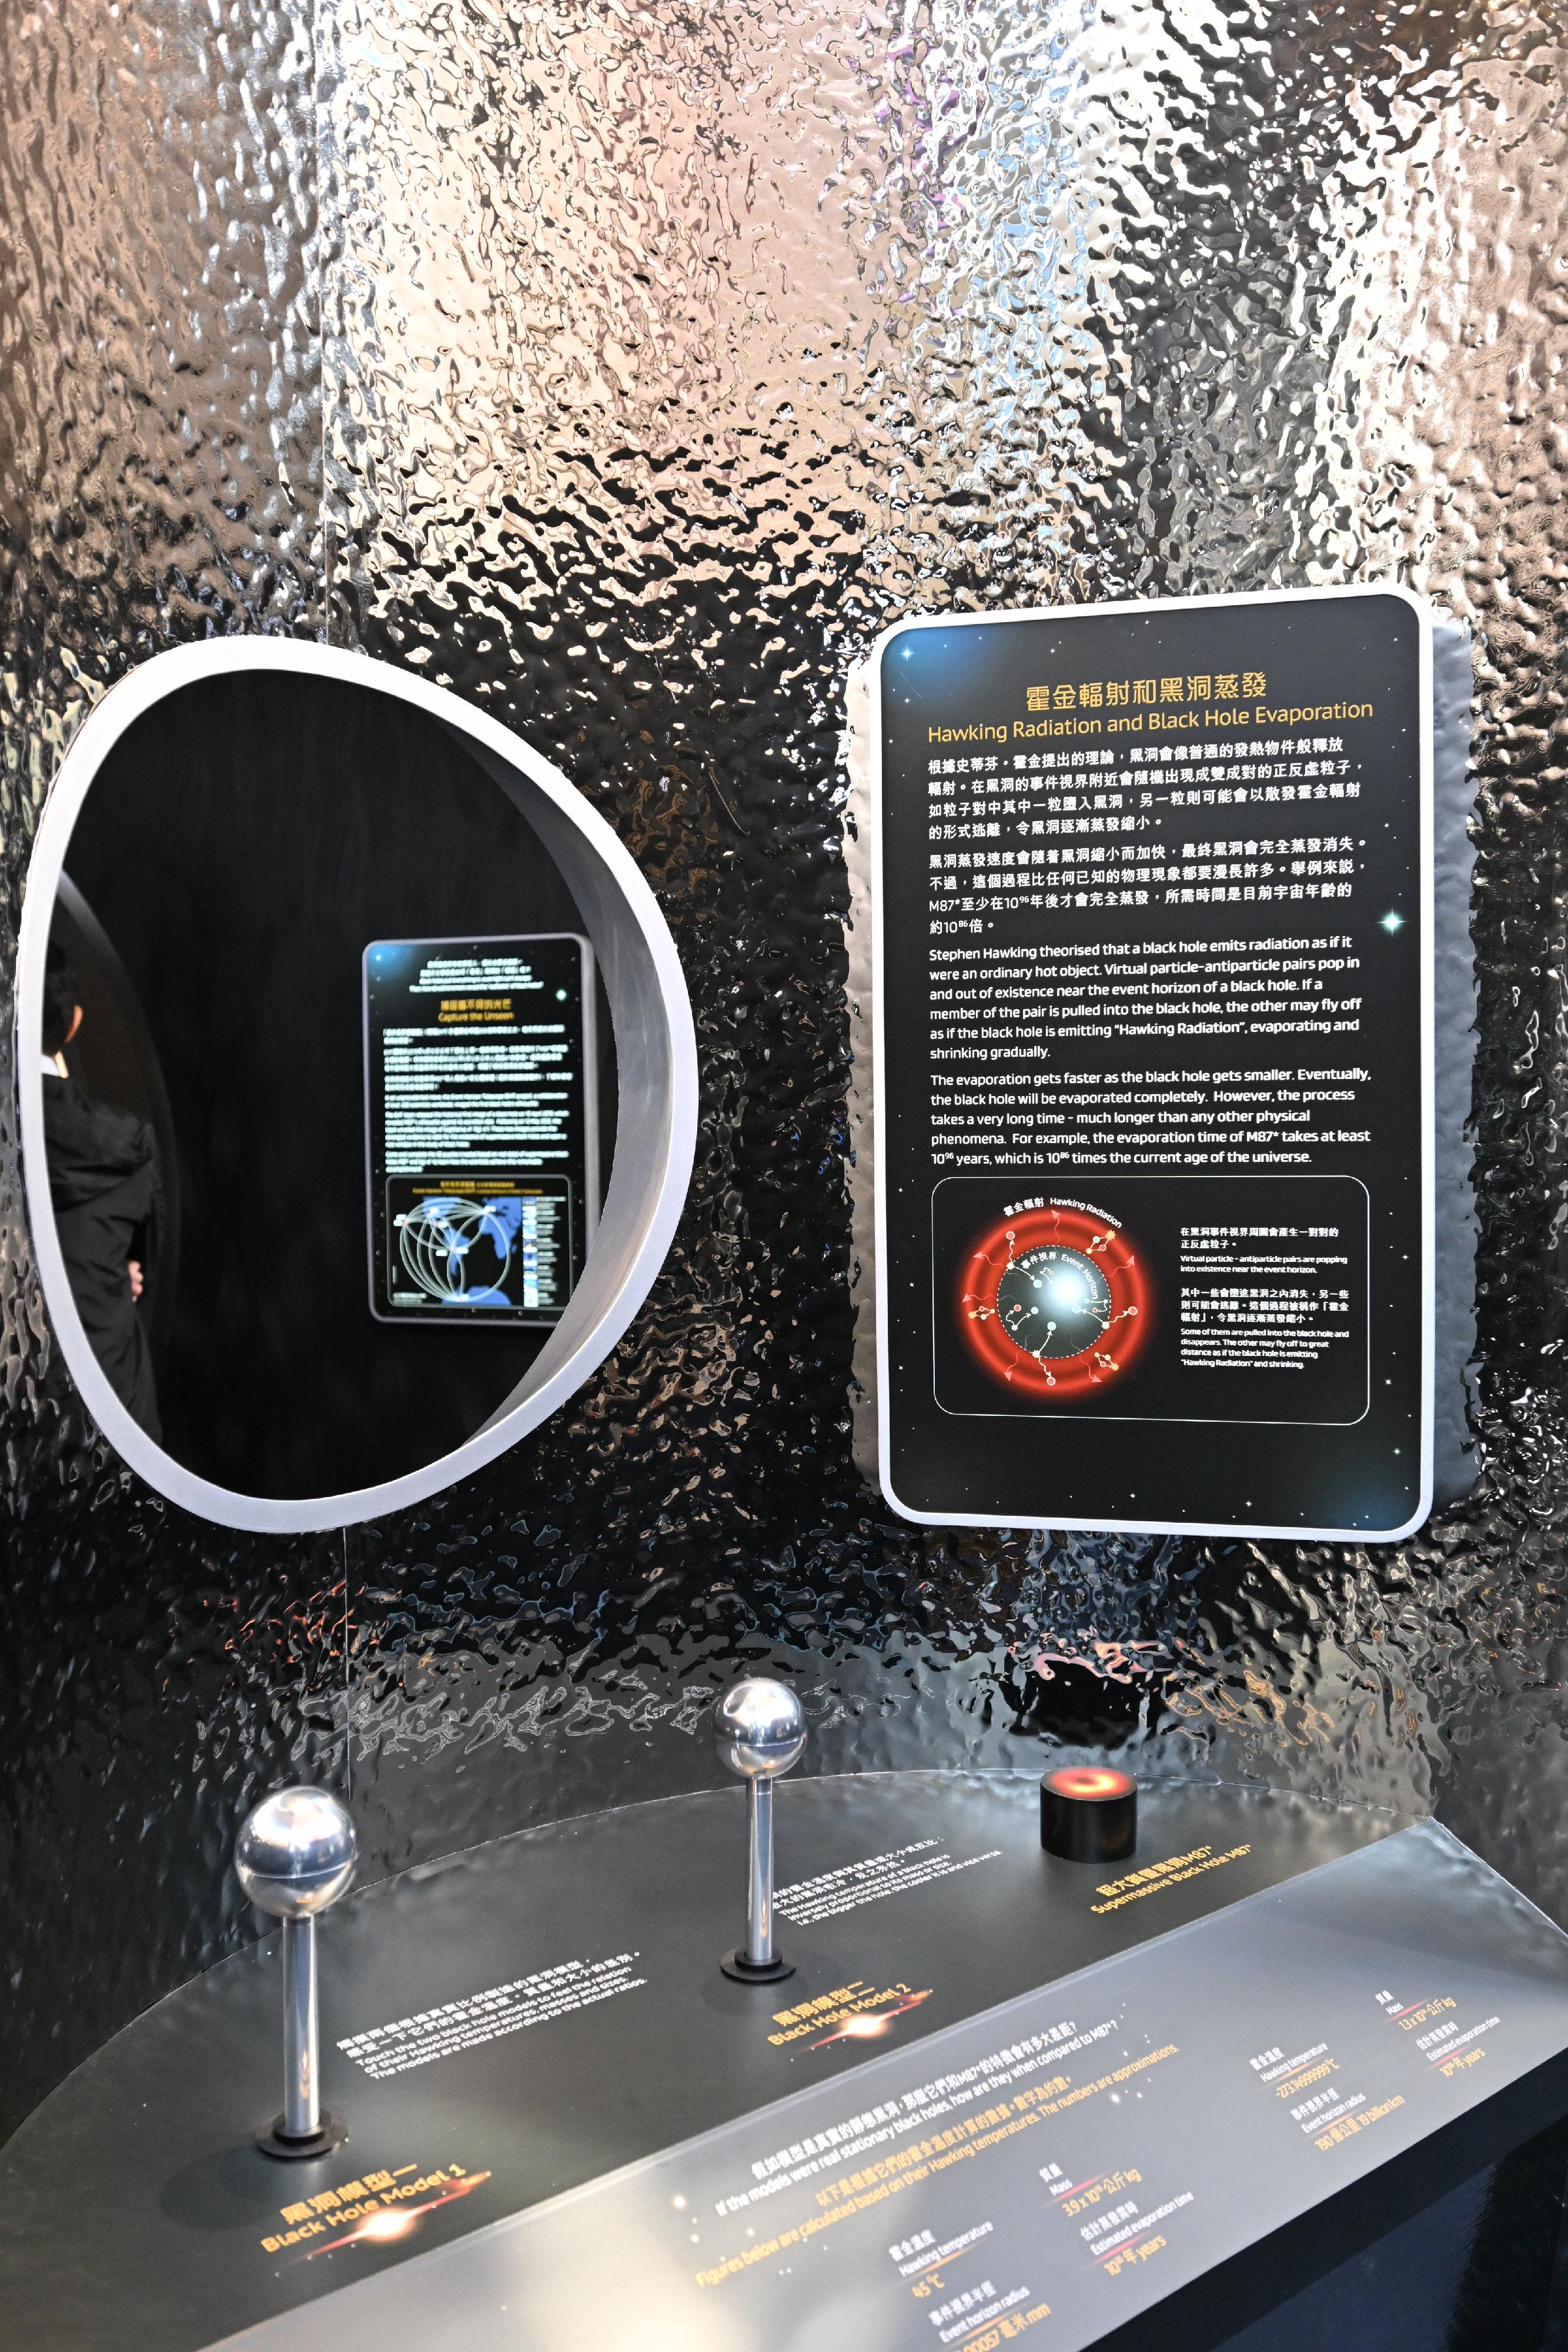 The Hong Kong Space Museum will launch a new free special exhibition, "Black Hole: The Information Barrier", starting tomorrow (October 25). The black hole models, created based on real data, at the exhibition allow visitors to experience the variations in the black holes' temperatures, masses, and sizes. 